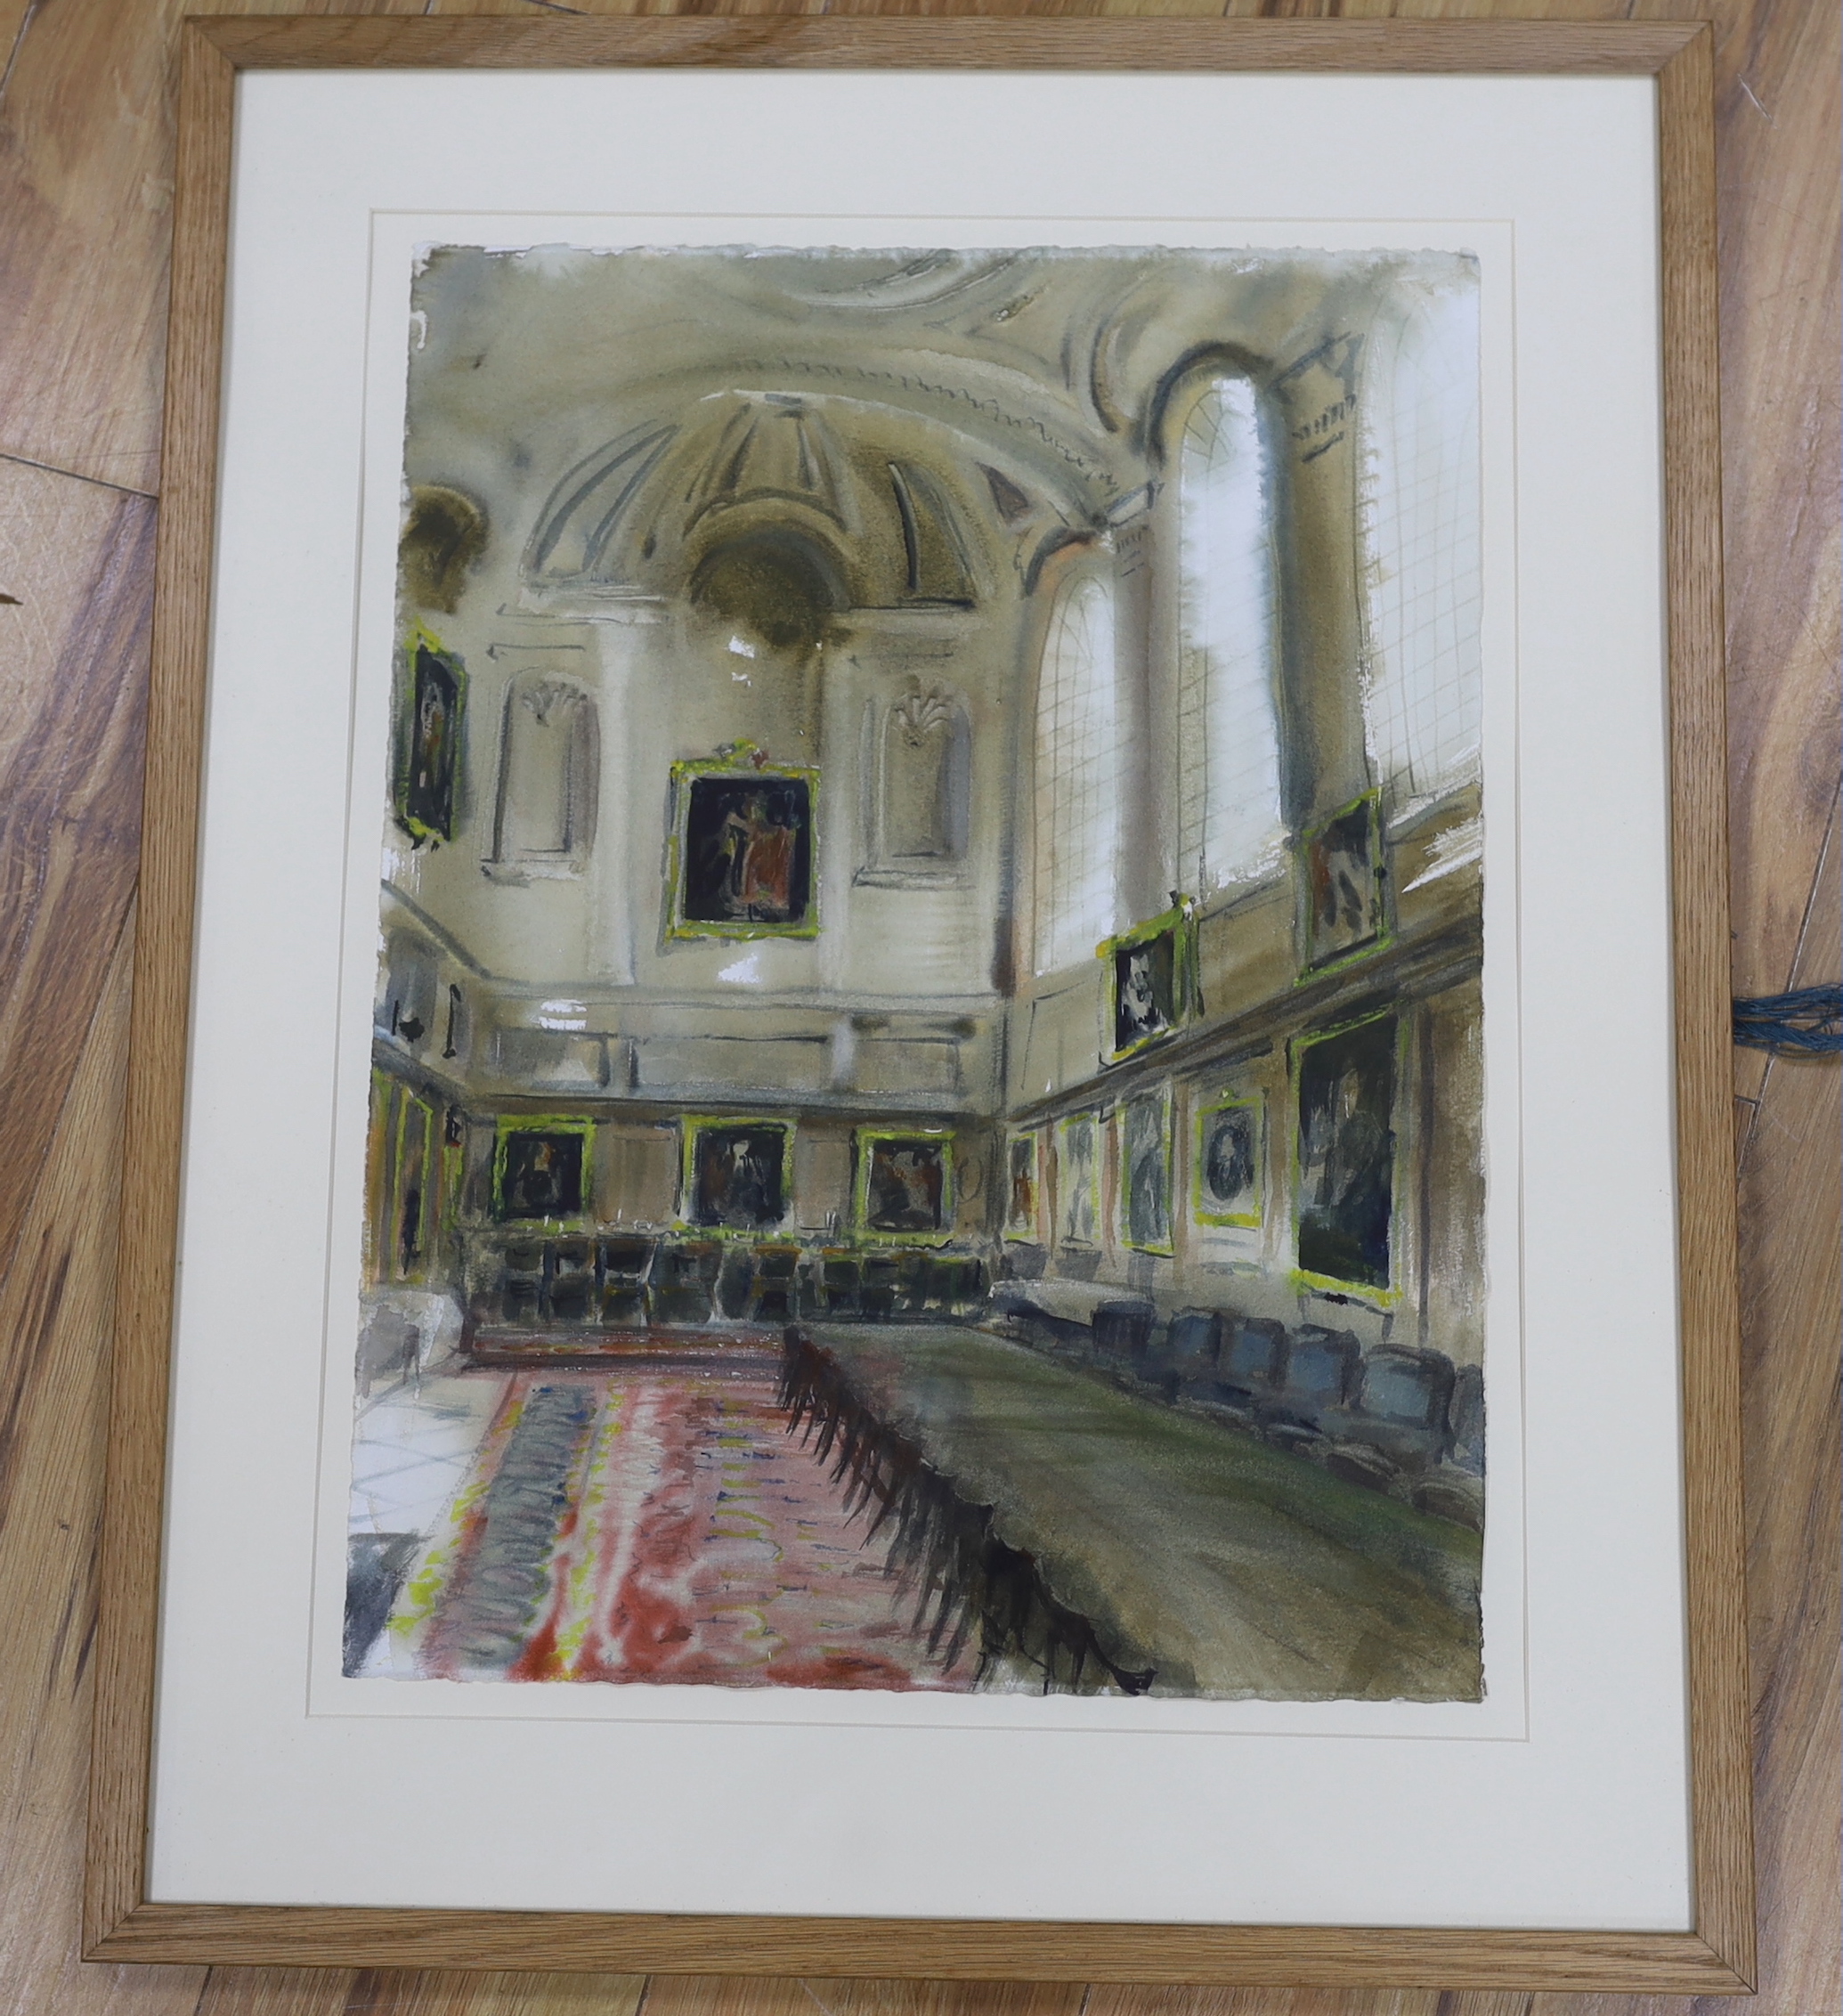 Modern British, watercolour, Grand interior with domed ceiling, indistinctly signed, 57cm x 42cm